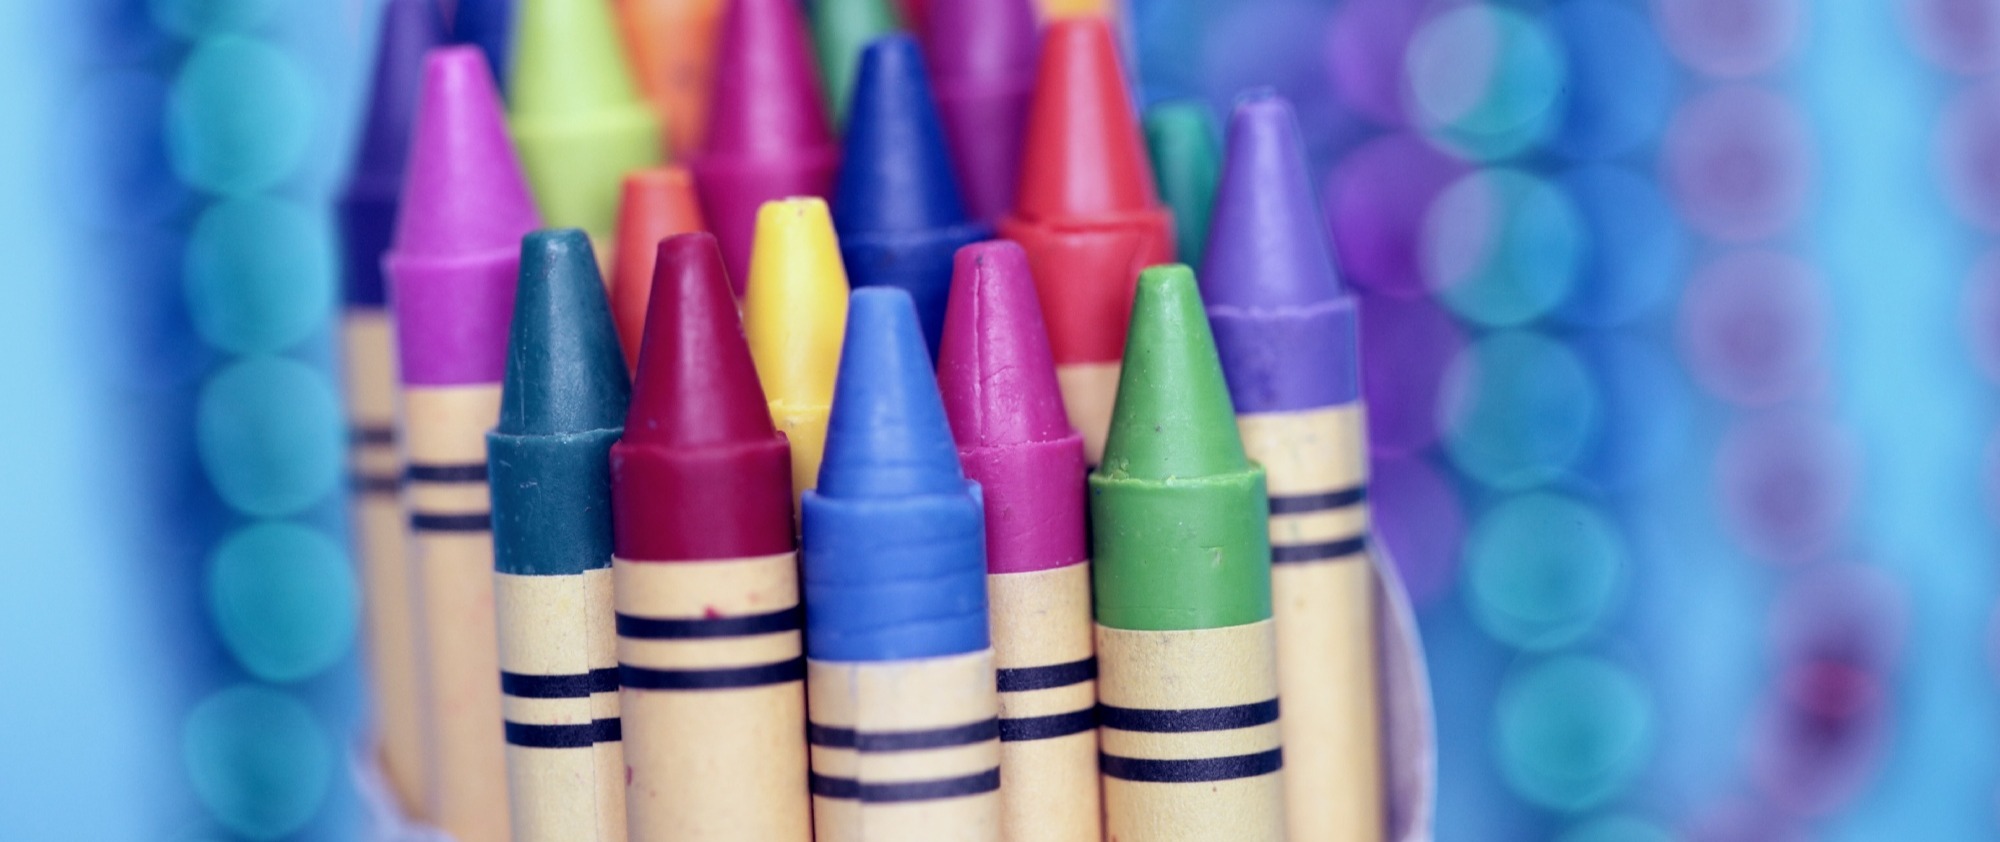 Close-up shot of multi-coloured crayons against an out-of-focus purple and blue background